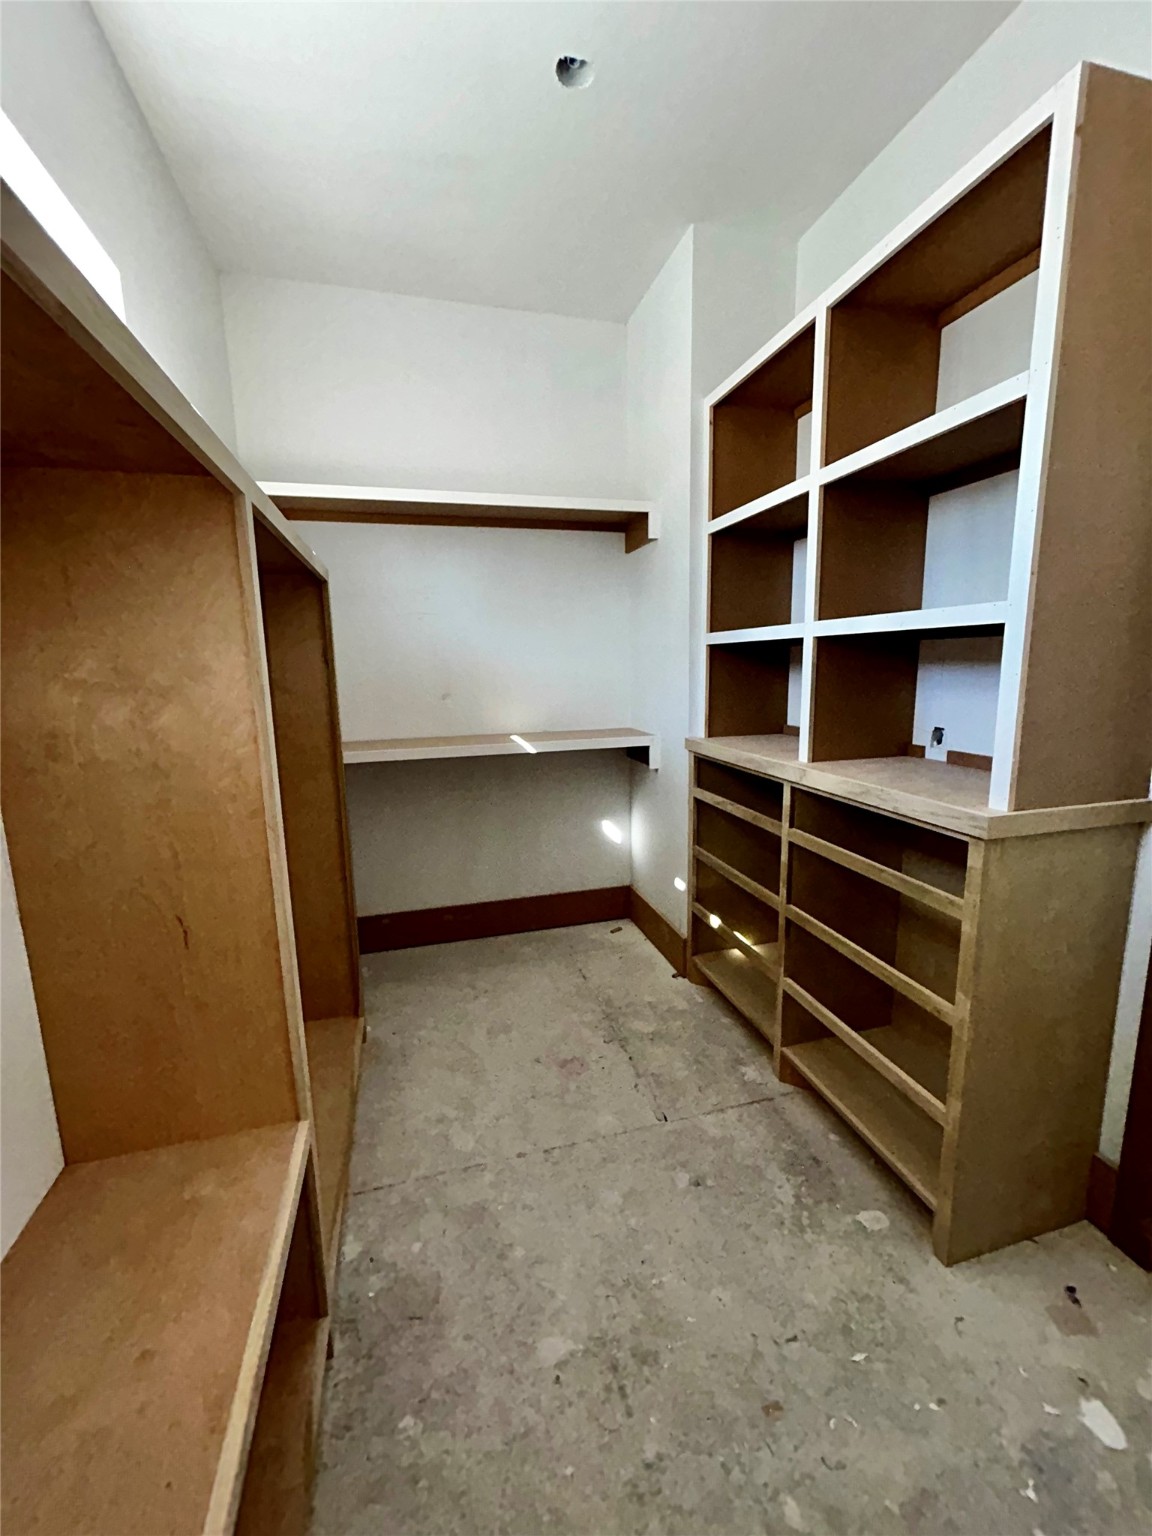 One of 2 walk-in closets in the primary bedroom.